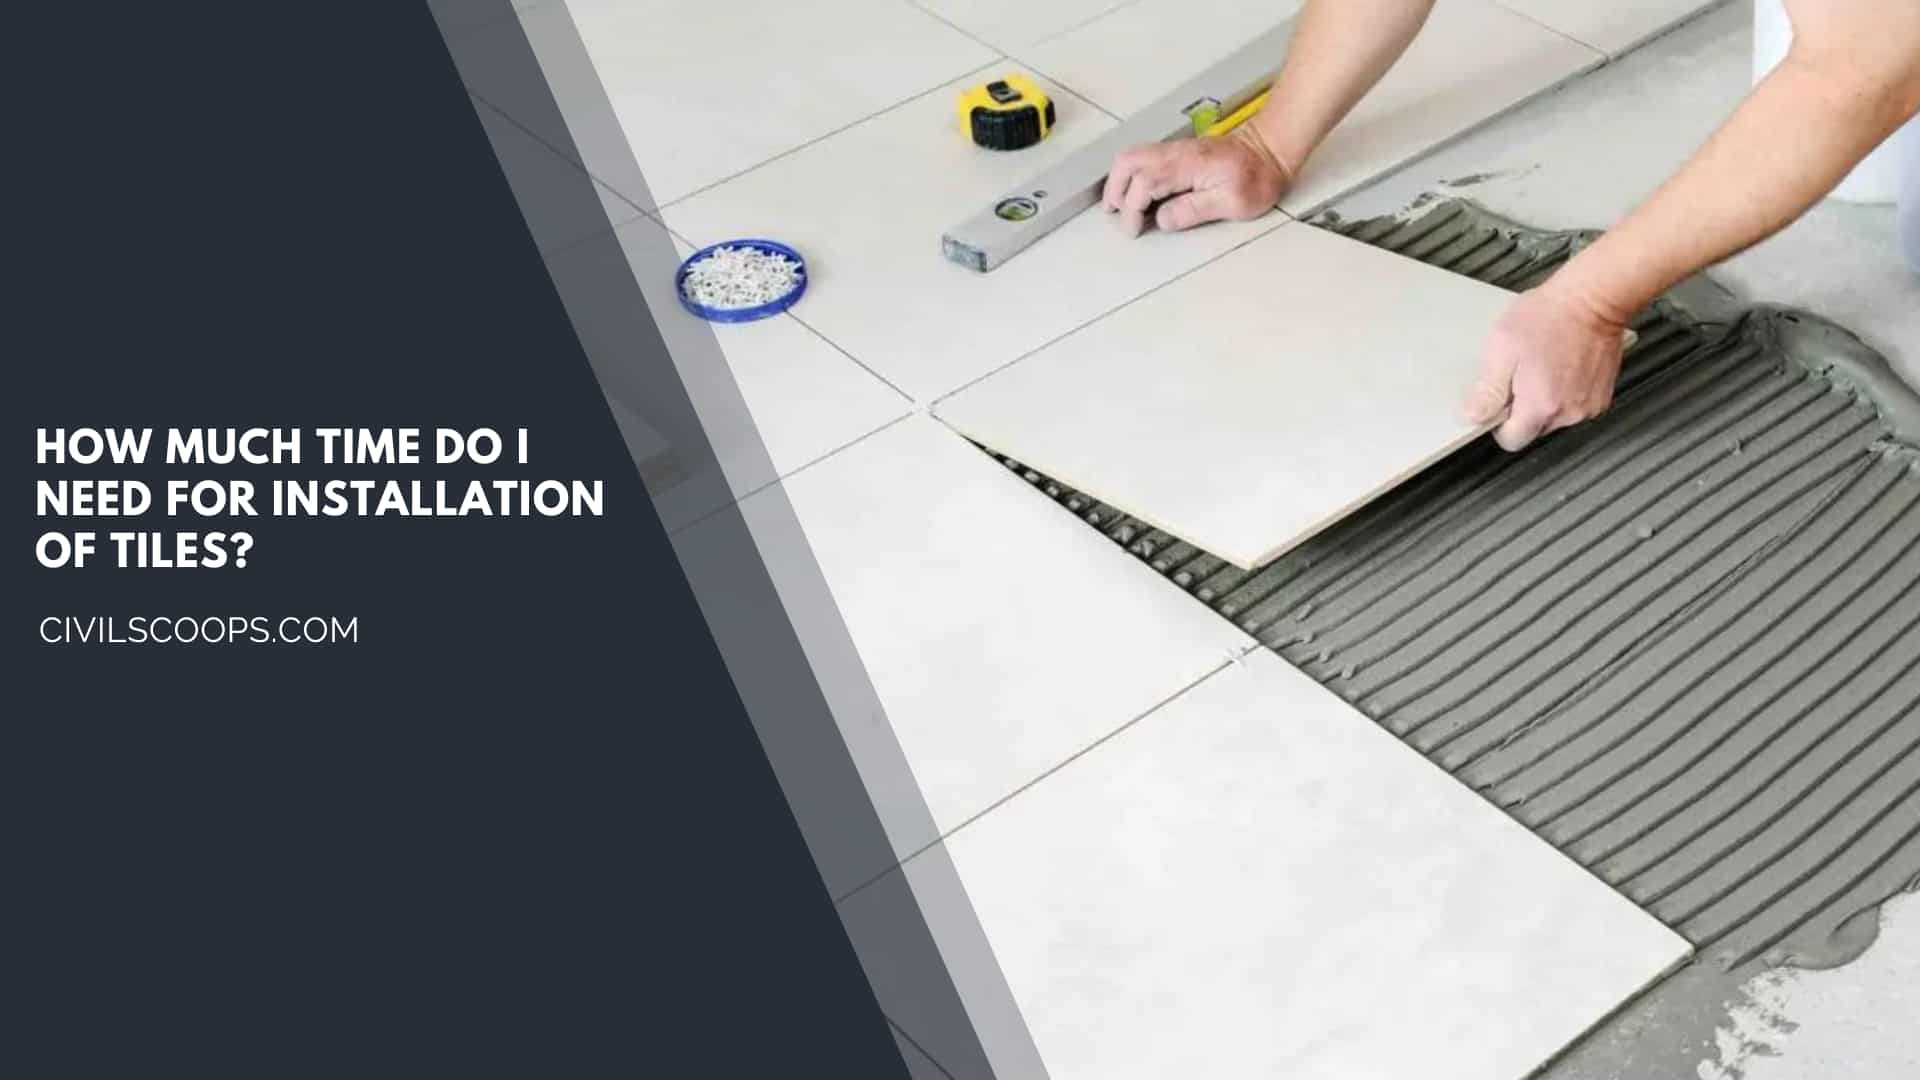 How Much Time Do I Need for Installation of Tiles?